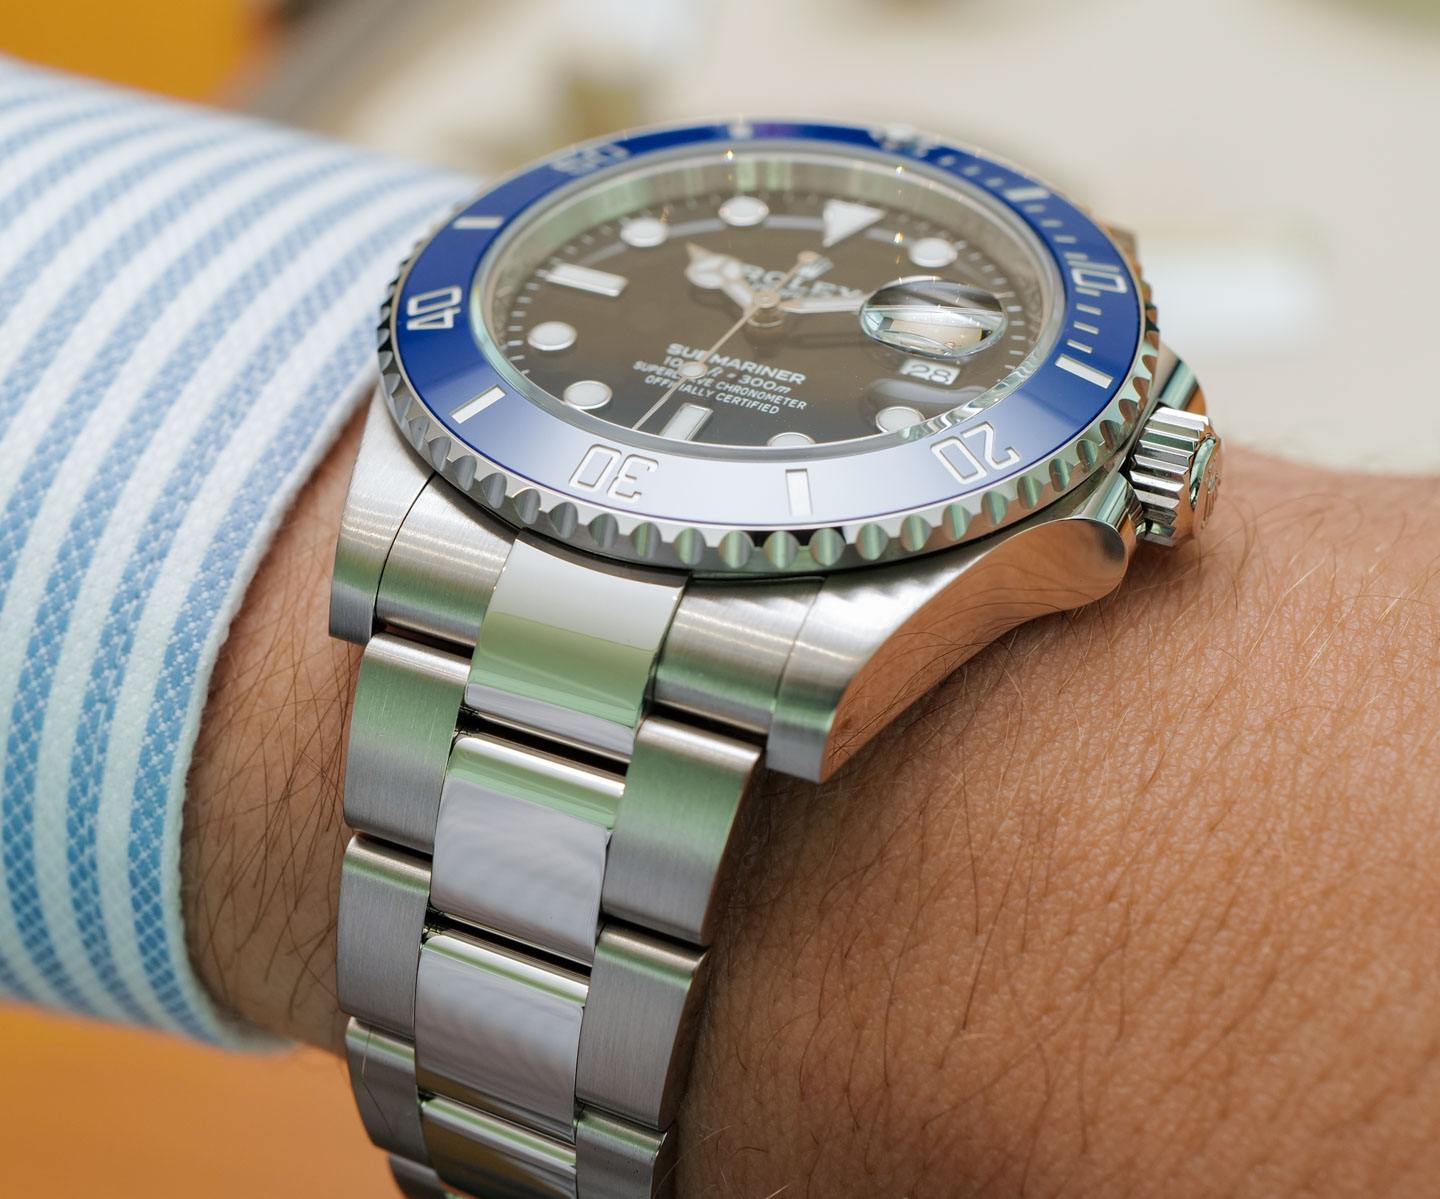 white gold submariner review